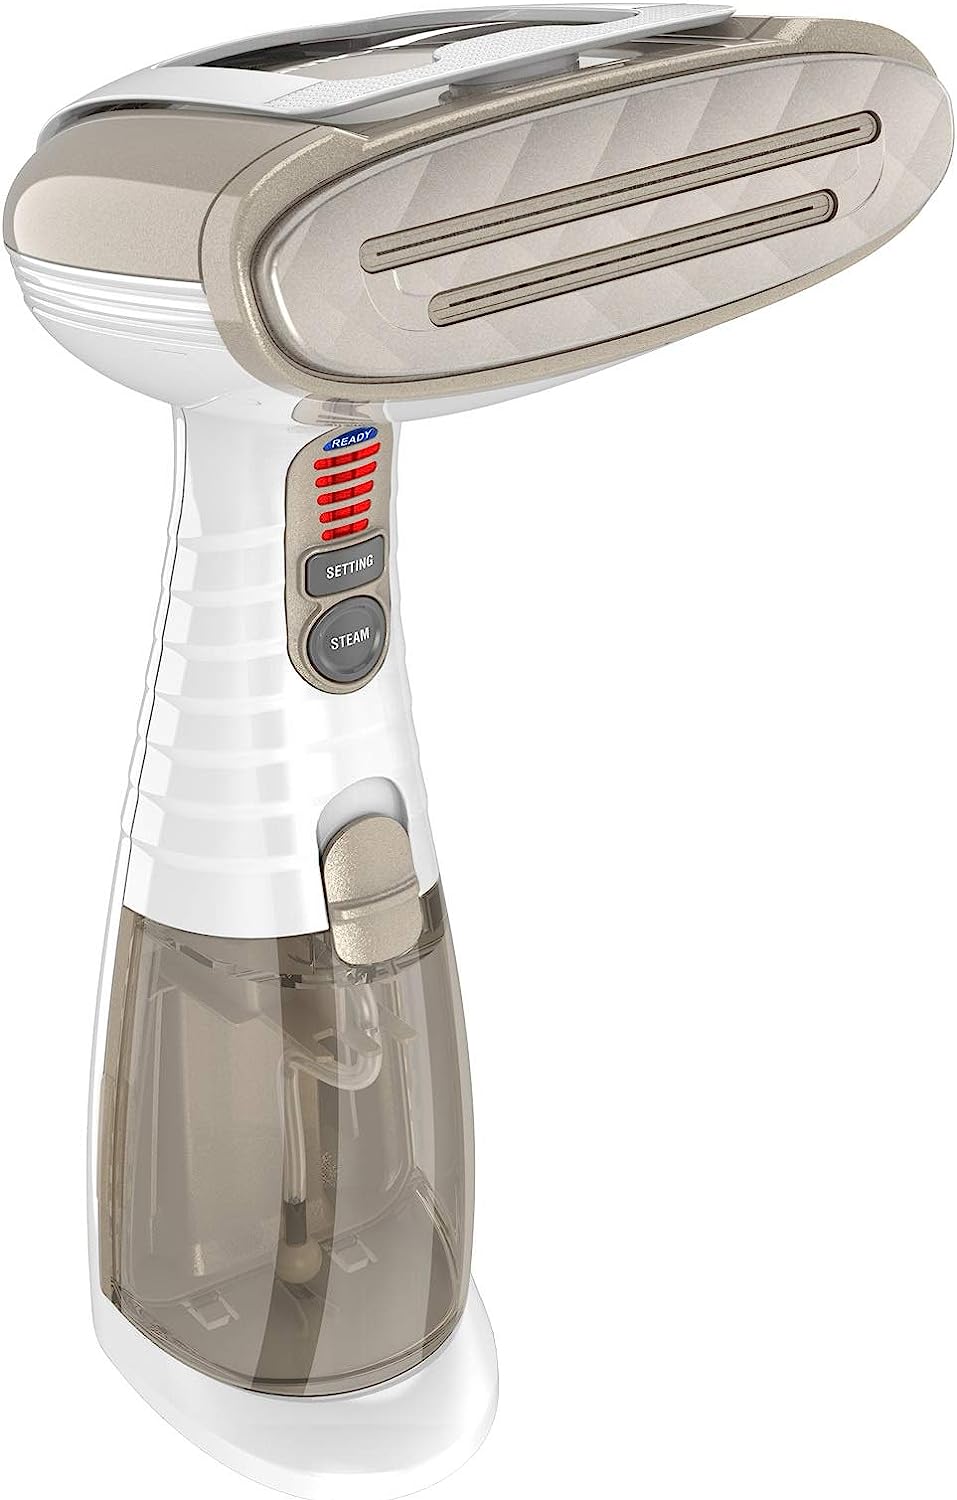 $40: Conair Handheld Garment Steamer for Clothes, Turbo ExtremeSteam 1875W @ Amazon